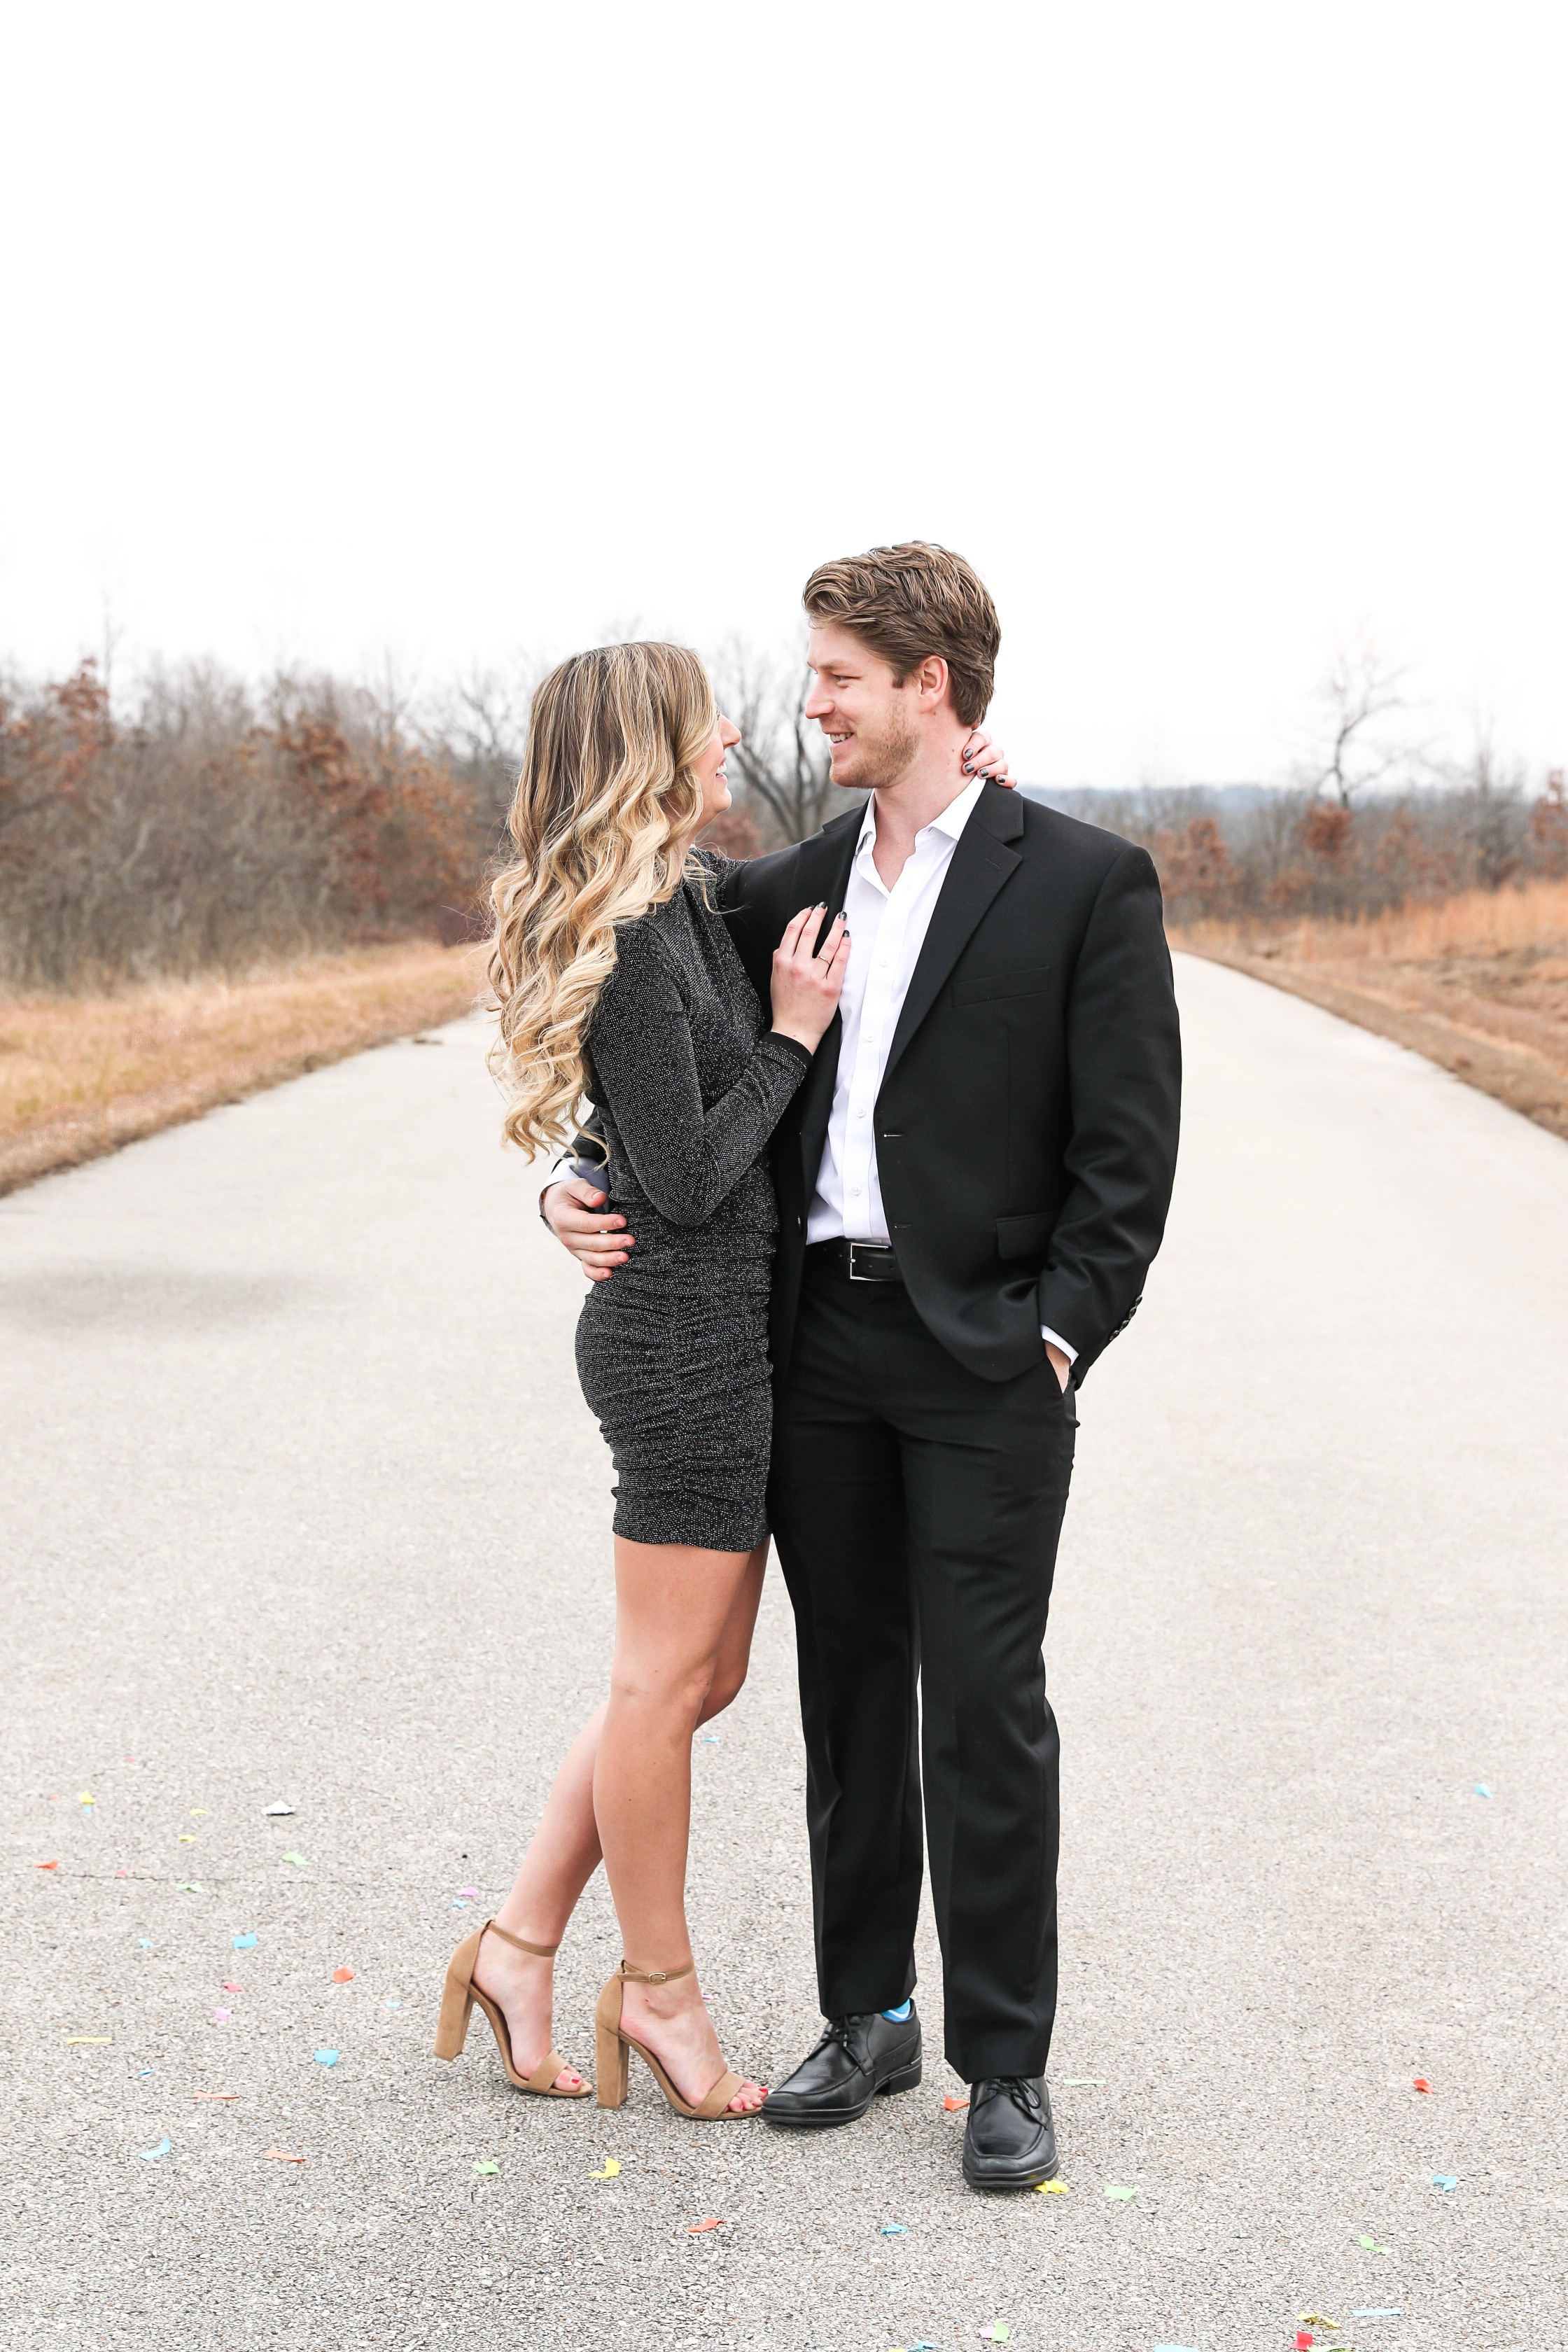 New Year's Eve photoshoot 2019! The cutest confetti photos! Hear the story about how I met my boyfriend one year ago on New Year's Eve! These are super cute couple photos! Details on fashion blog daily dose of charm by lauren lindmark